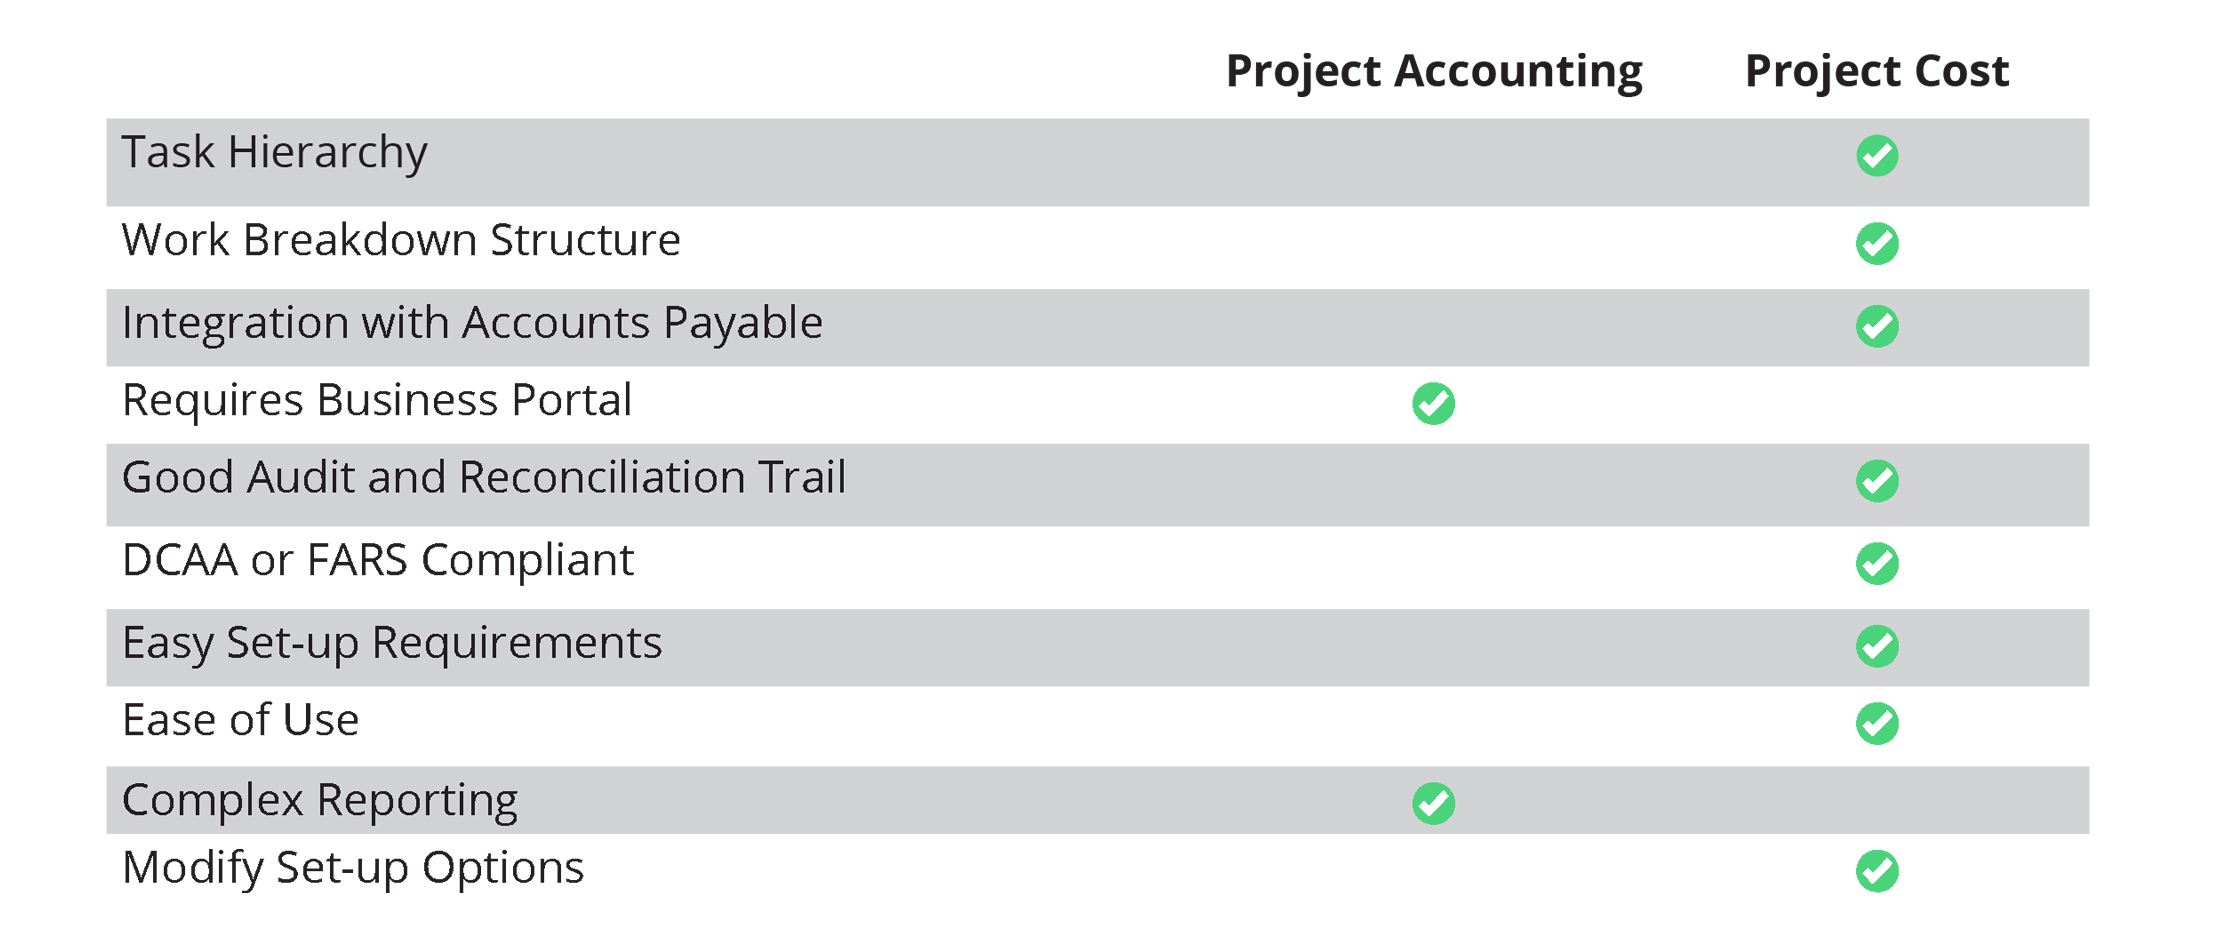 Project Cost versus Project Accounting Chart